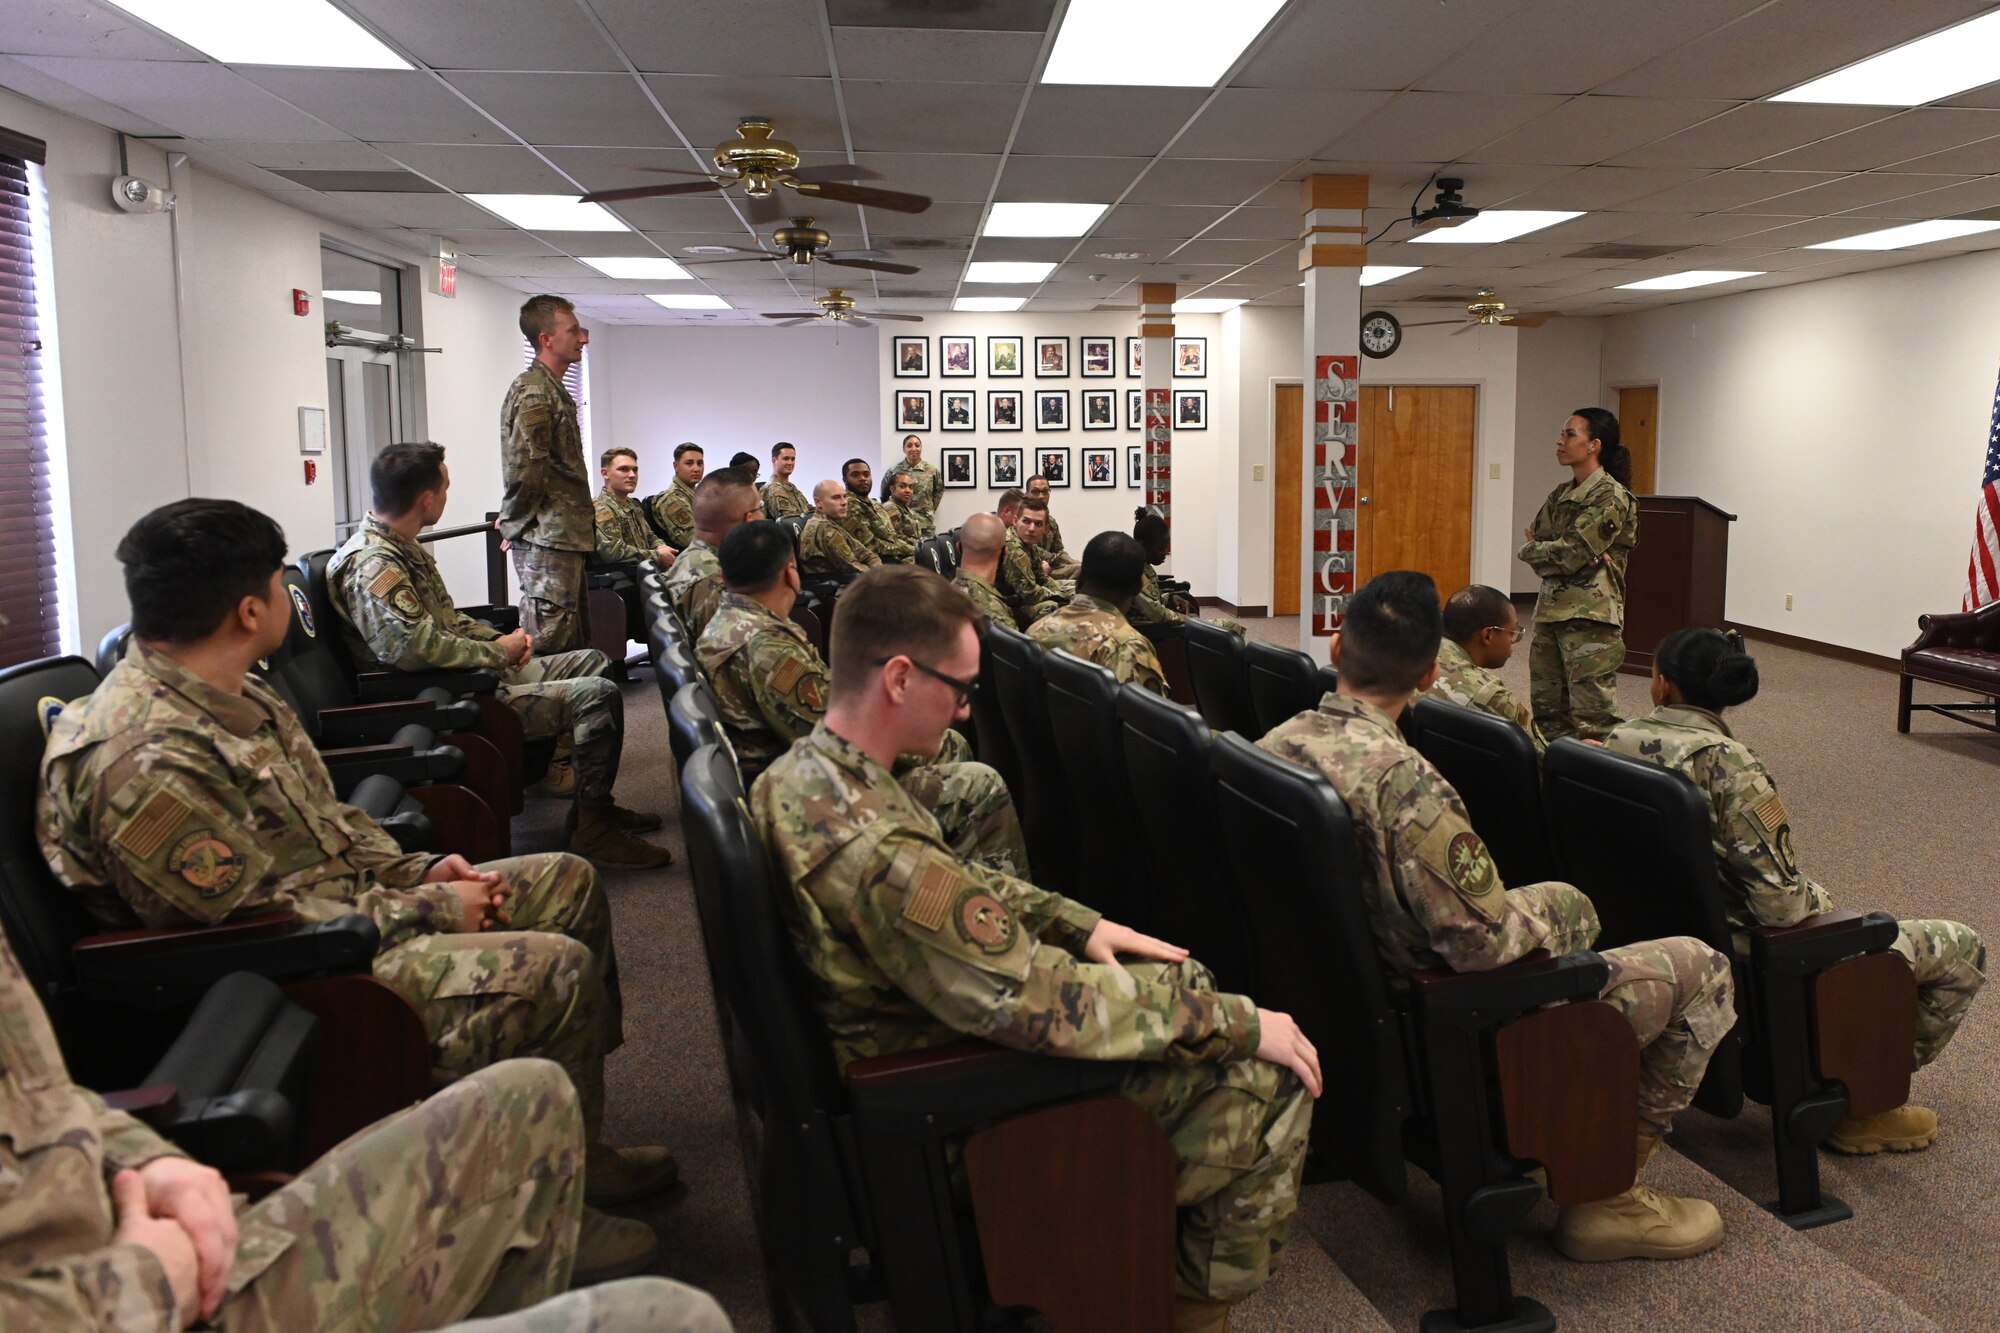 Chief Master Sgt. Kristina Rogers, 19th Air Force command chief, speaks to students at the Holloman Airman Leadership School, July 19, 2021, on Holloman Air Force Base, N.M. The students had an opportunity to seek mentorship from Rogers about leadership and U.S. Air Force policy. (U.S. Air Force photo by Staff Sgt. Christopher S. Sparks.)